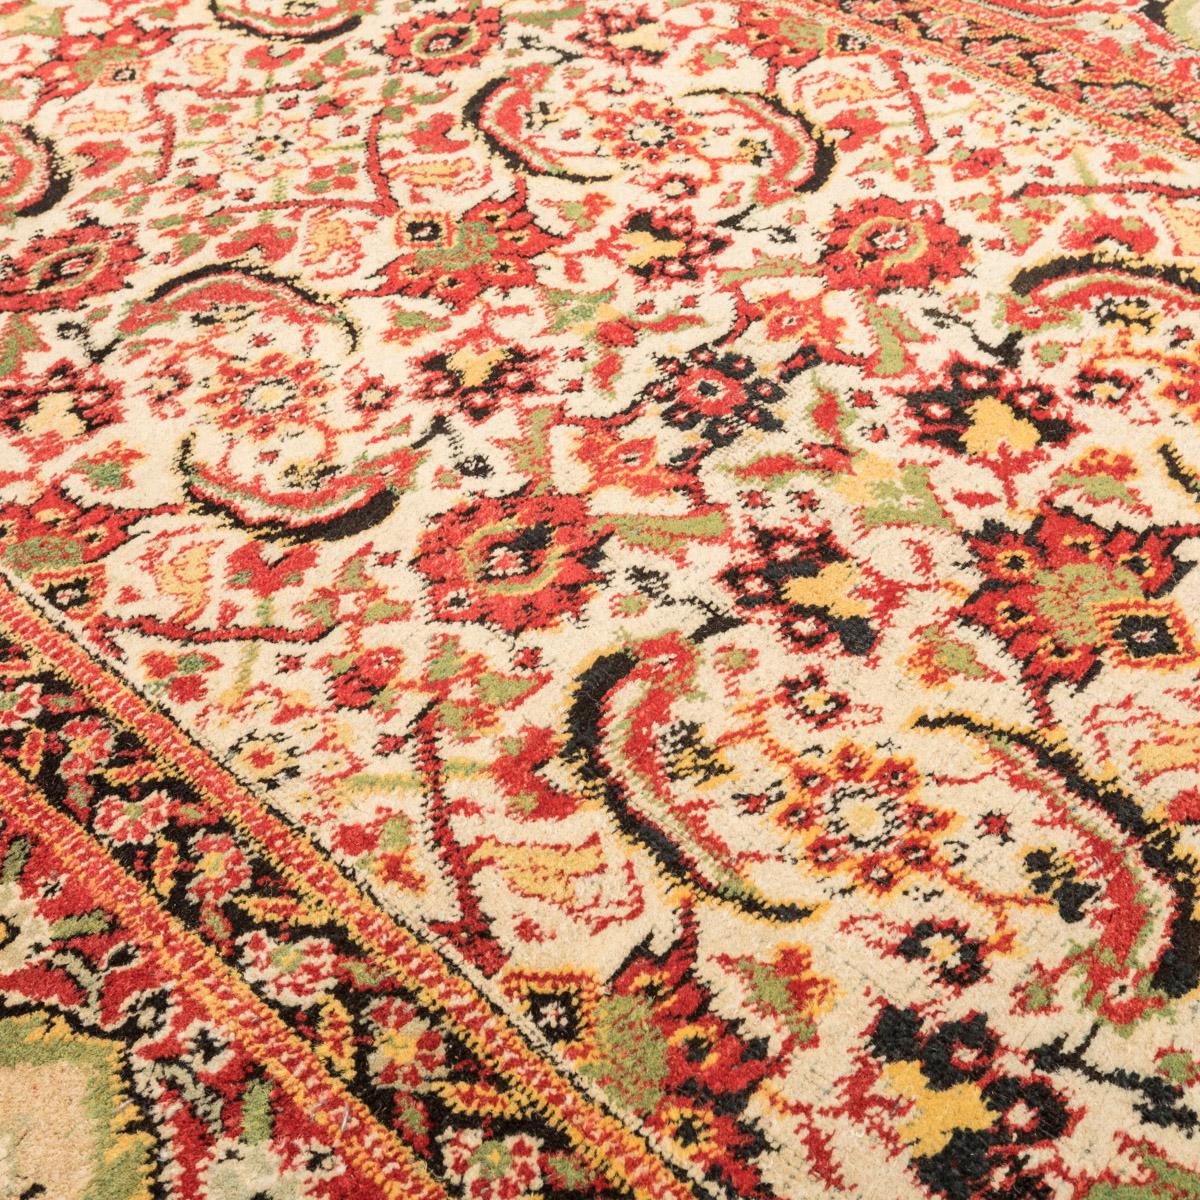 Hand-Knotted XIX Century, Agra Rug in Reds and Yellows on a Beige Background. For Sale